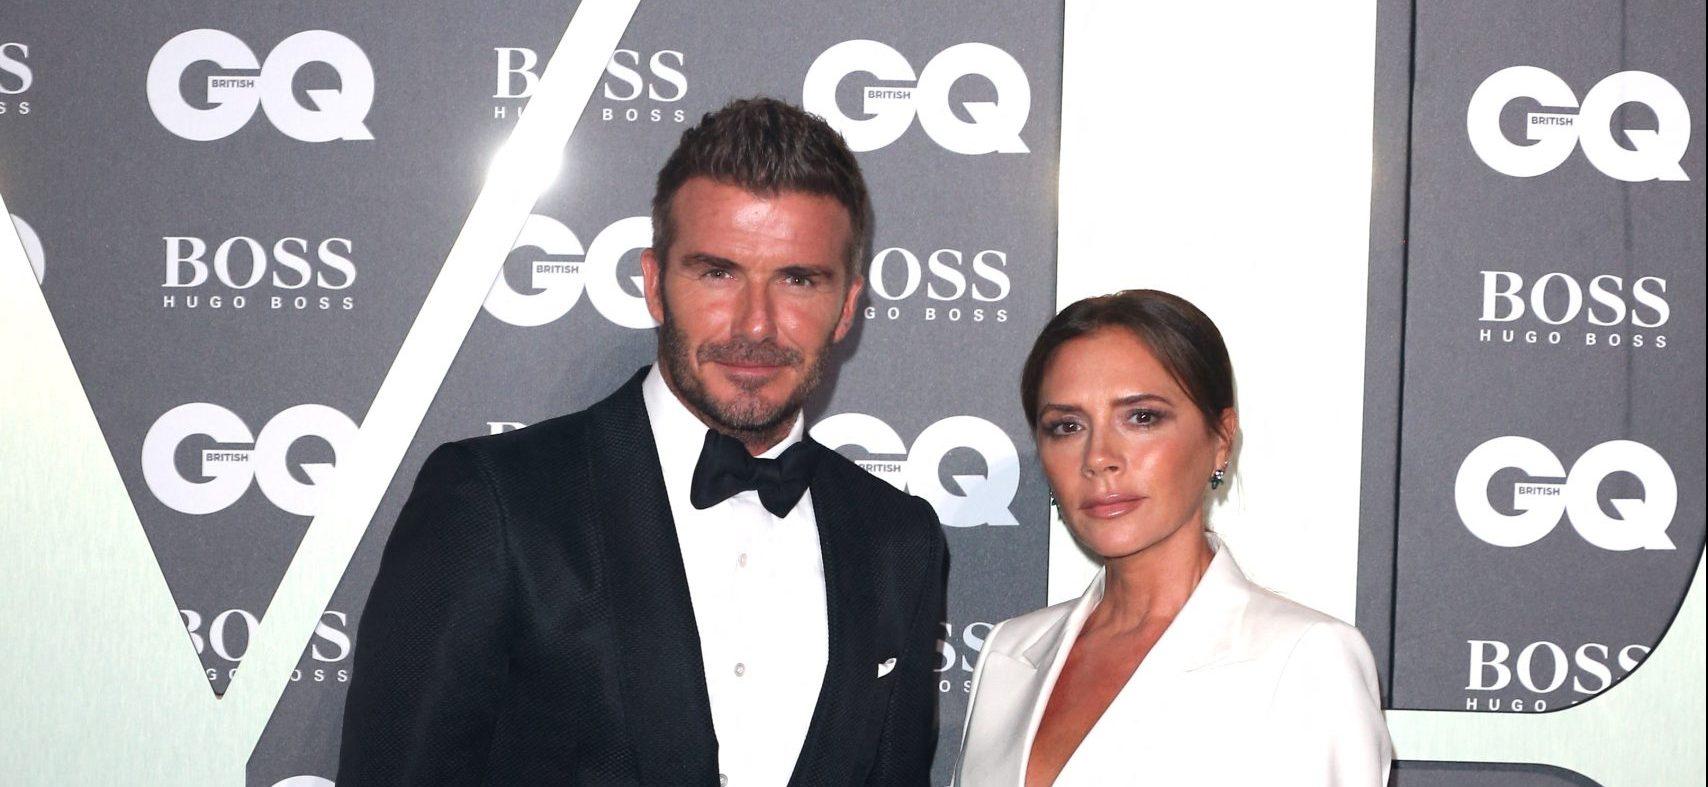 David & Victoria Beckham at the GQ Men of the Year Awards in London, UK.